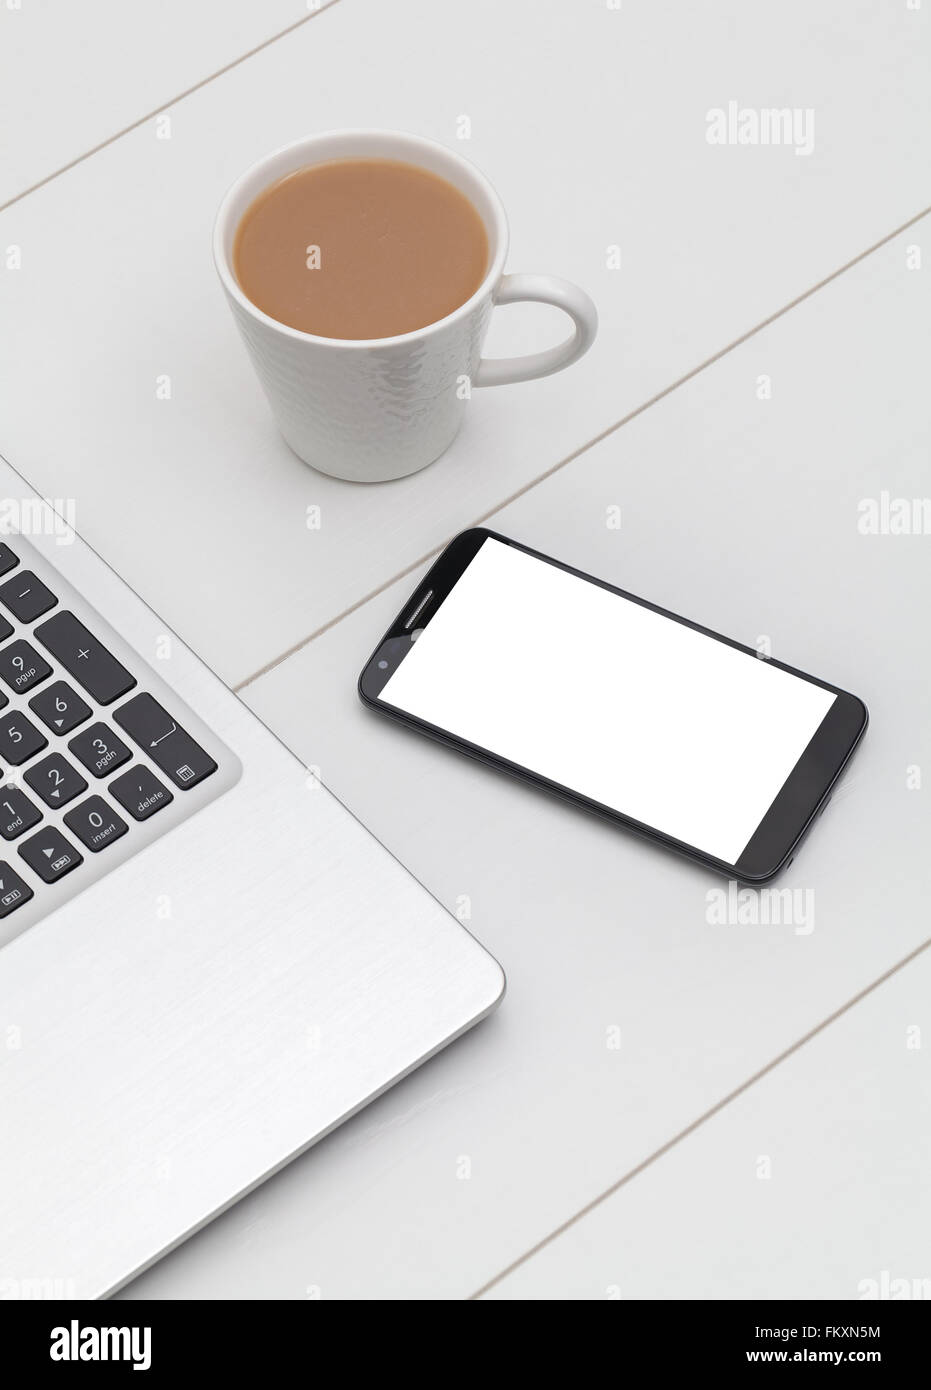 smartphone mockup, laptop and coffee on office table Stock Photo